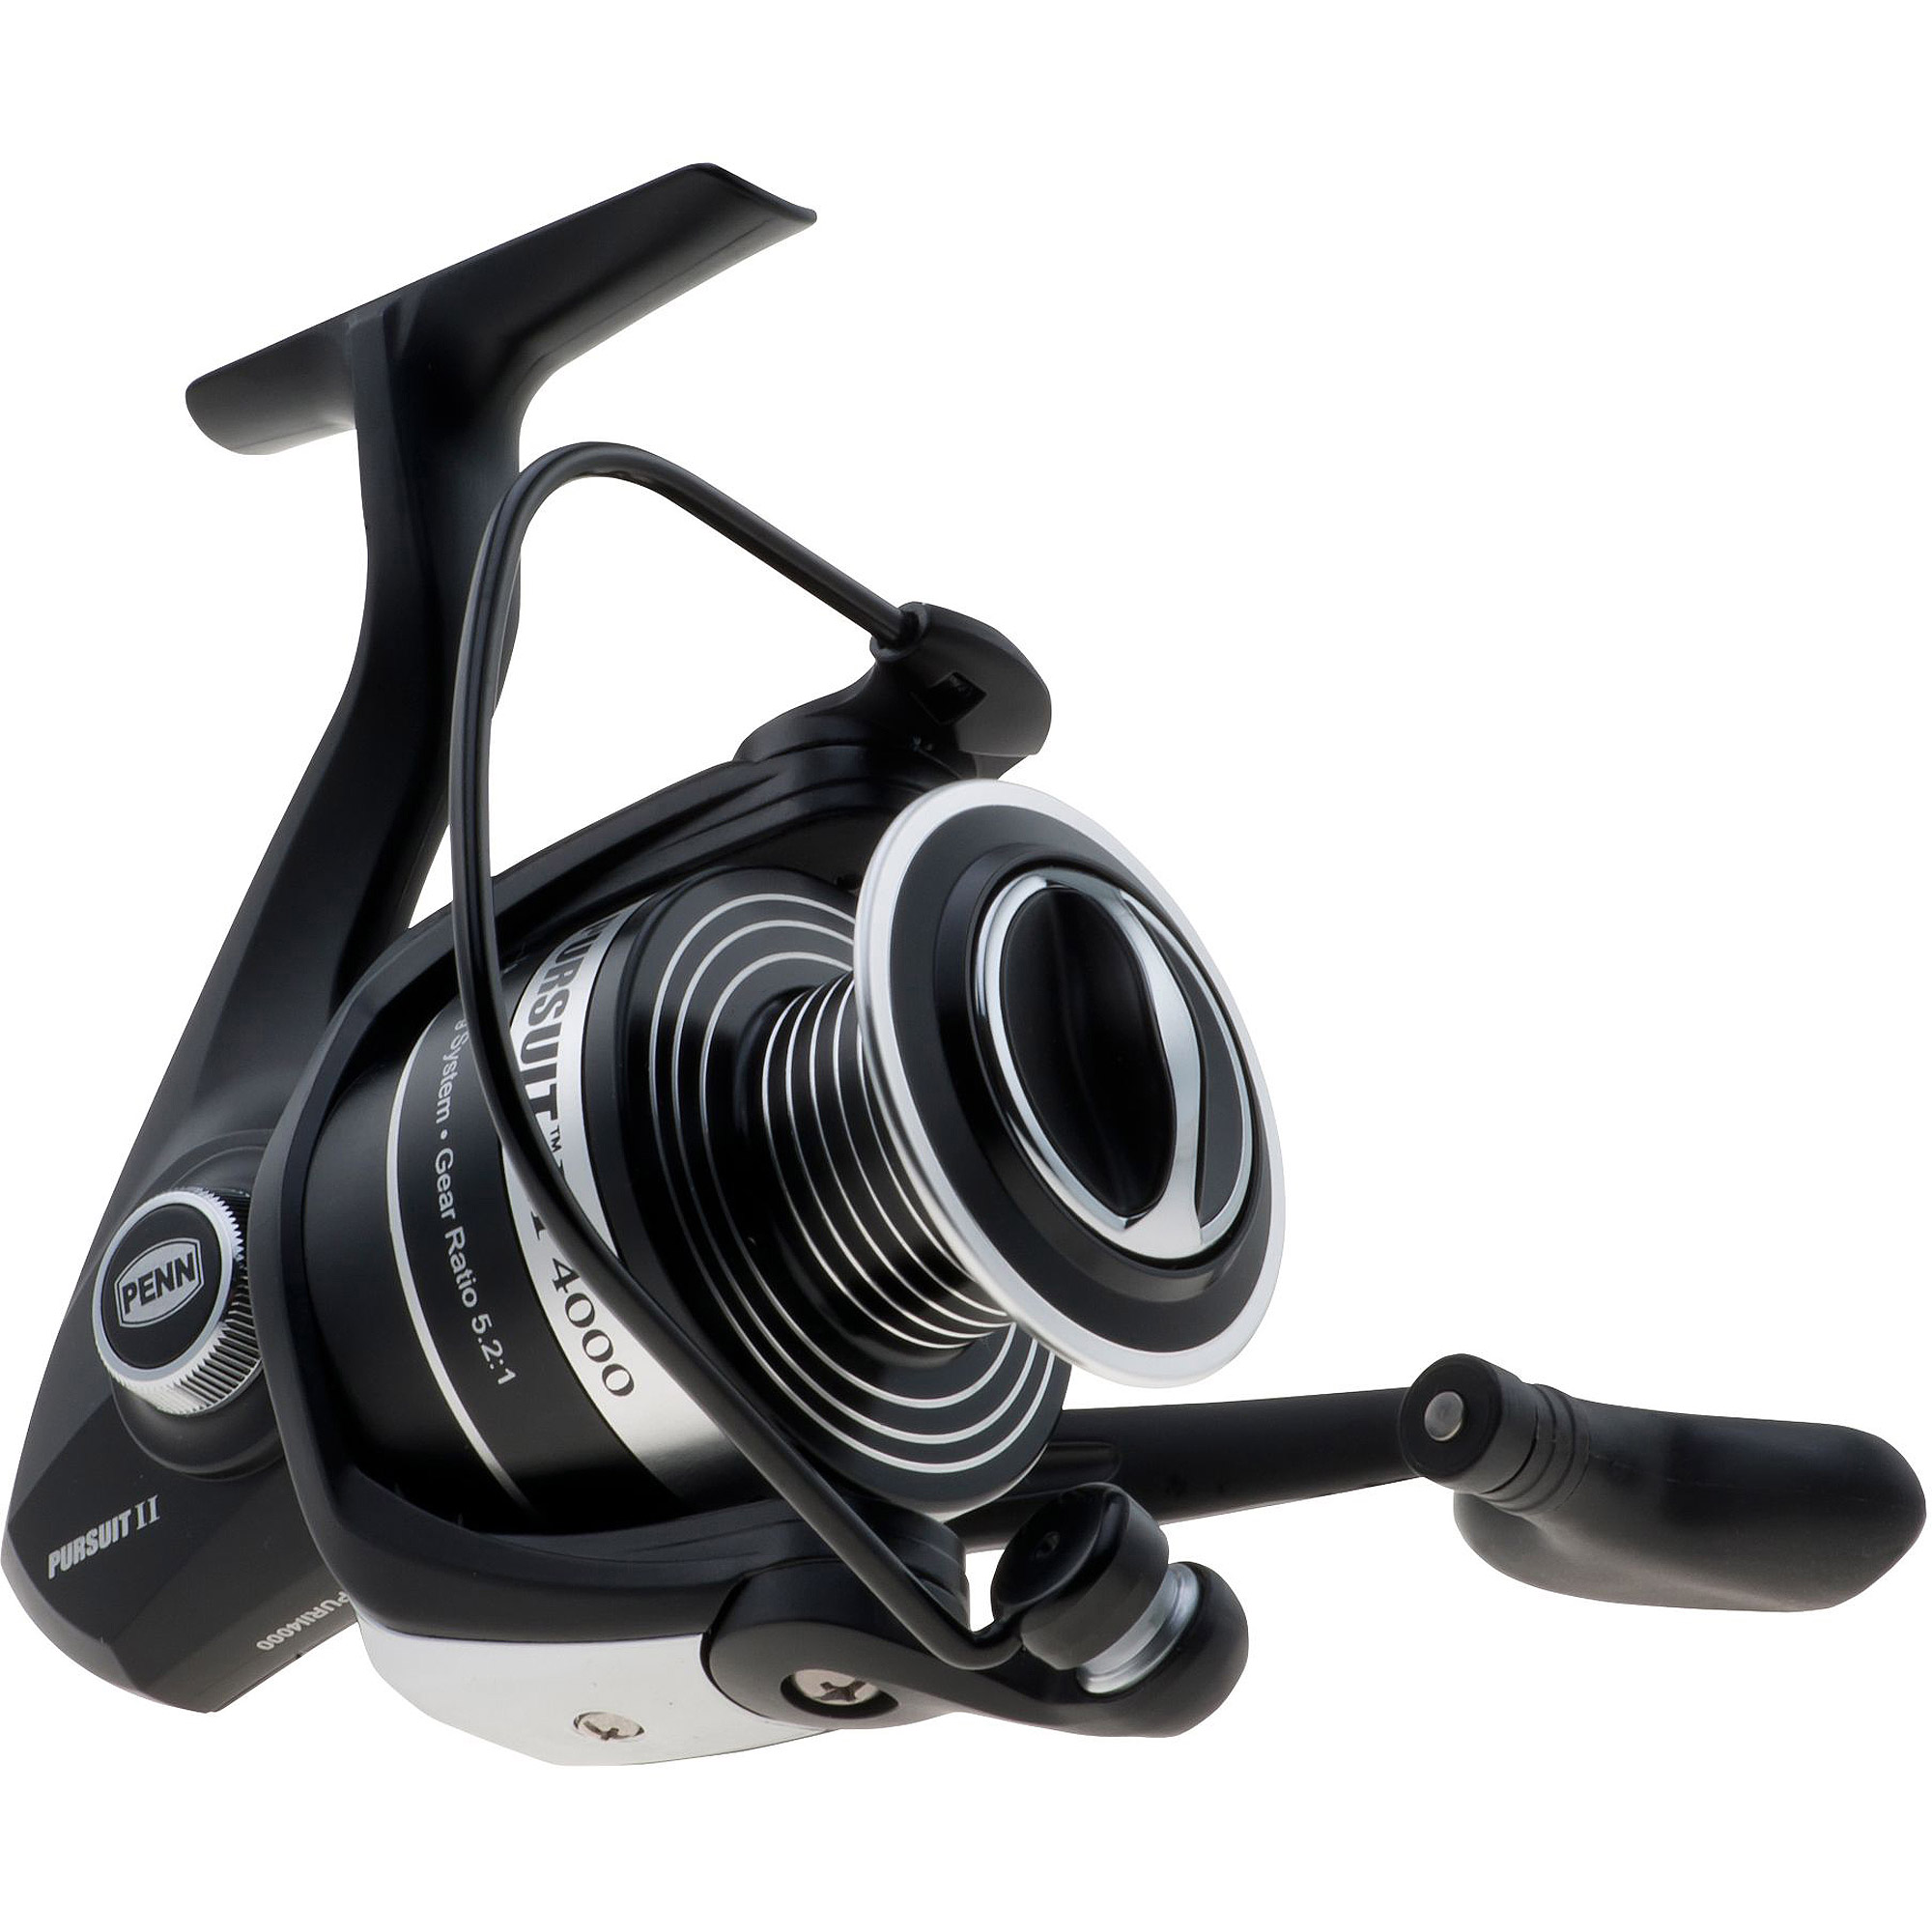 Penn Pursuit II Spin Reel 4000 Boxed 1292958 - image 1 of 6